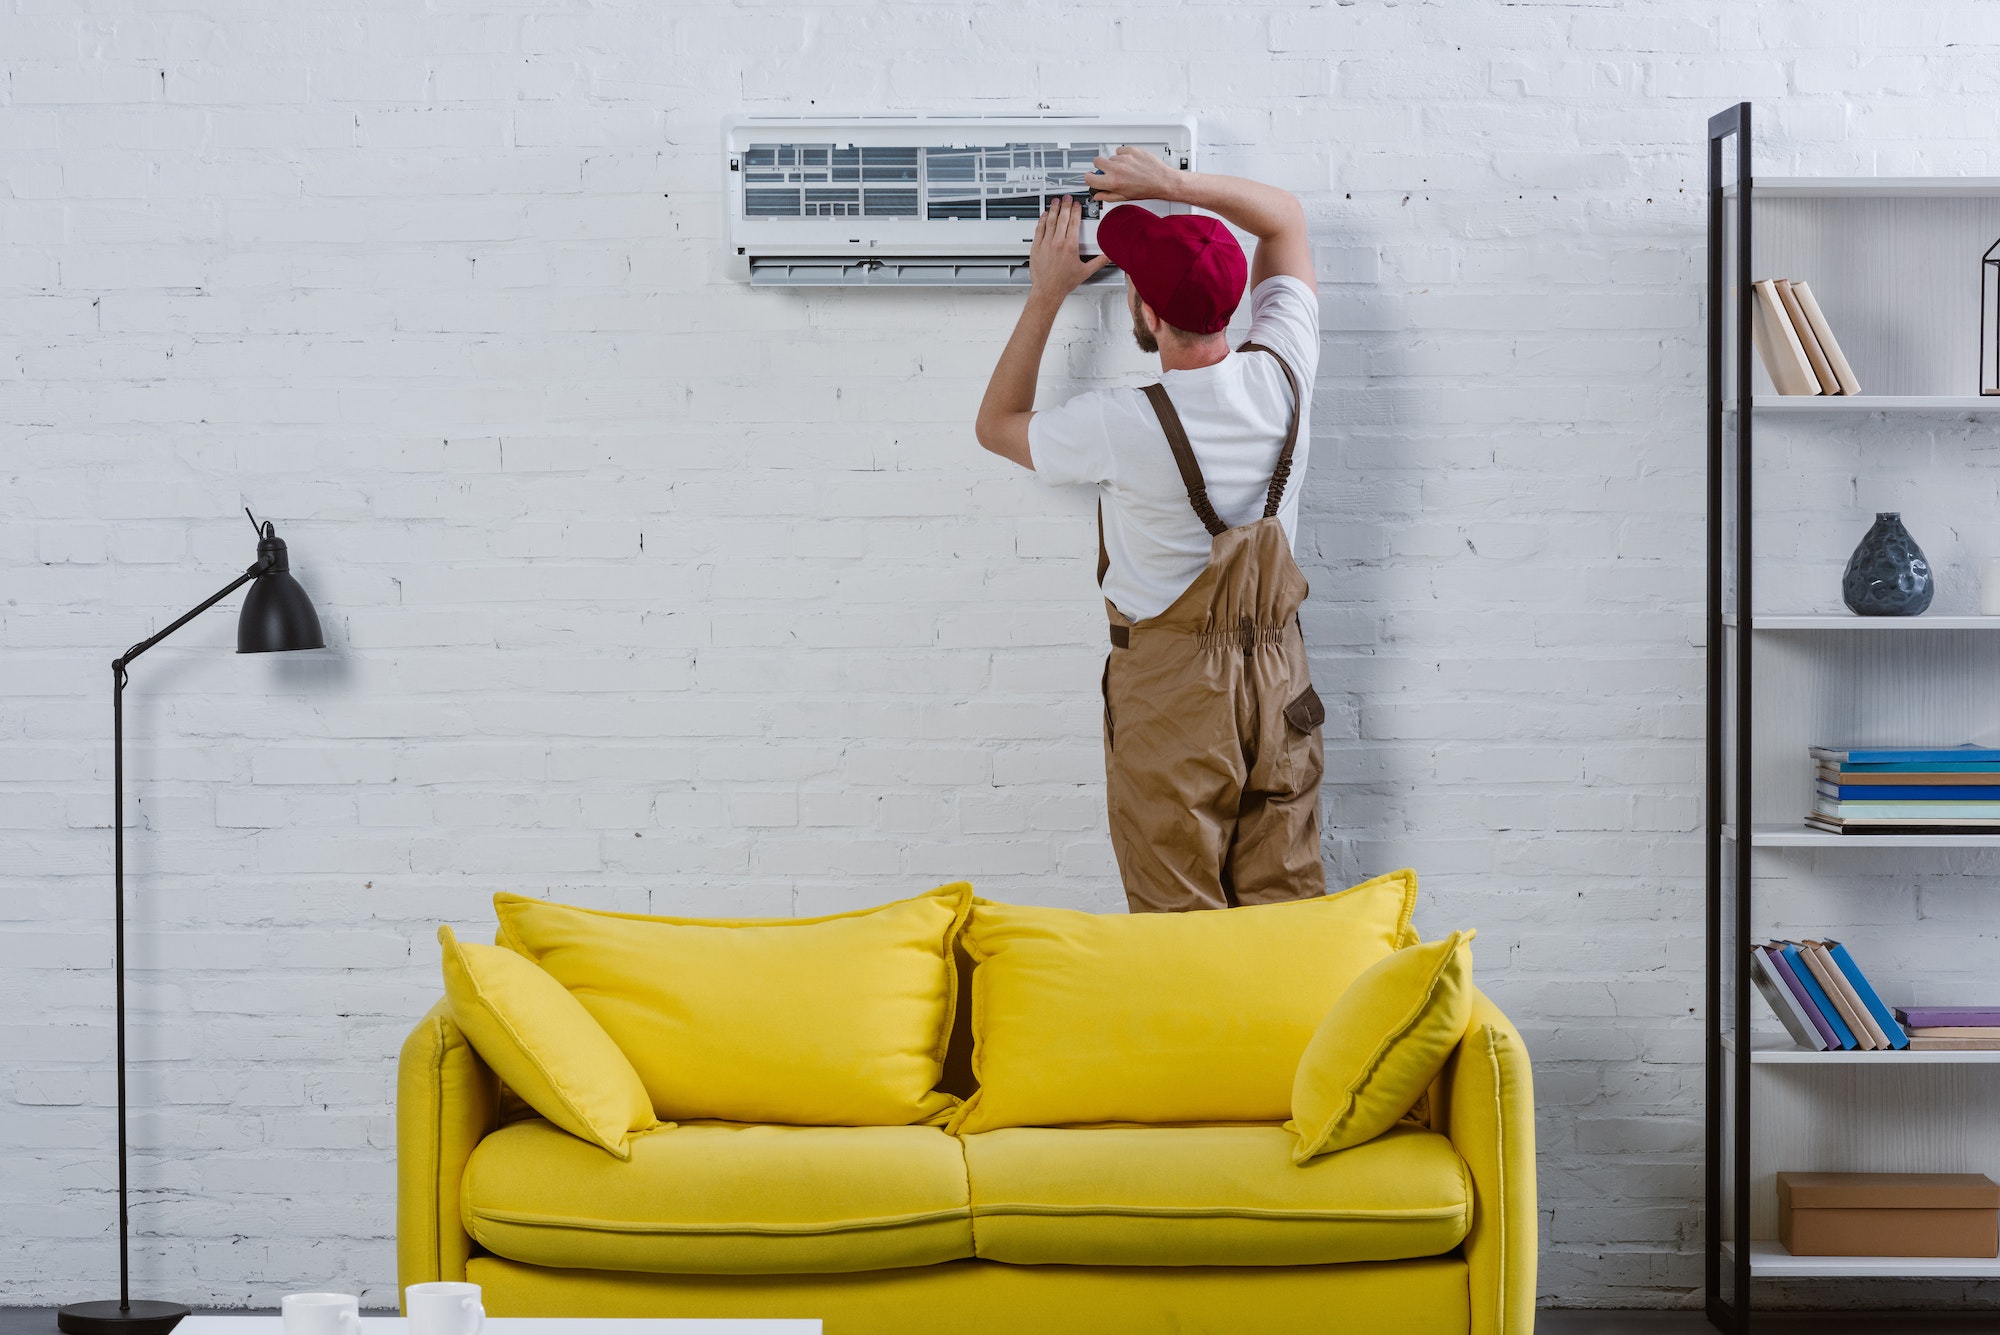 professional repairman fixing air conditioner hanging on white brick wall